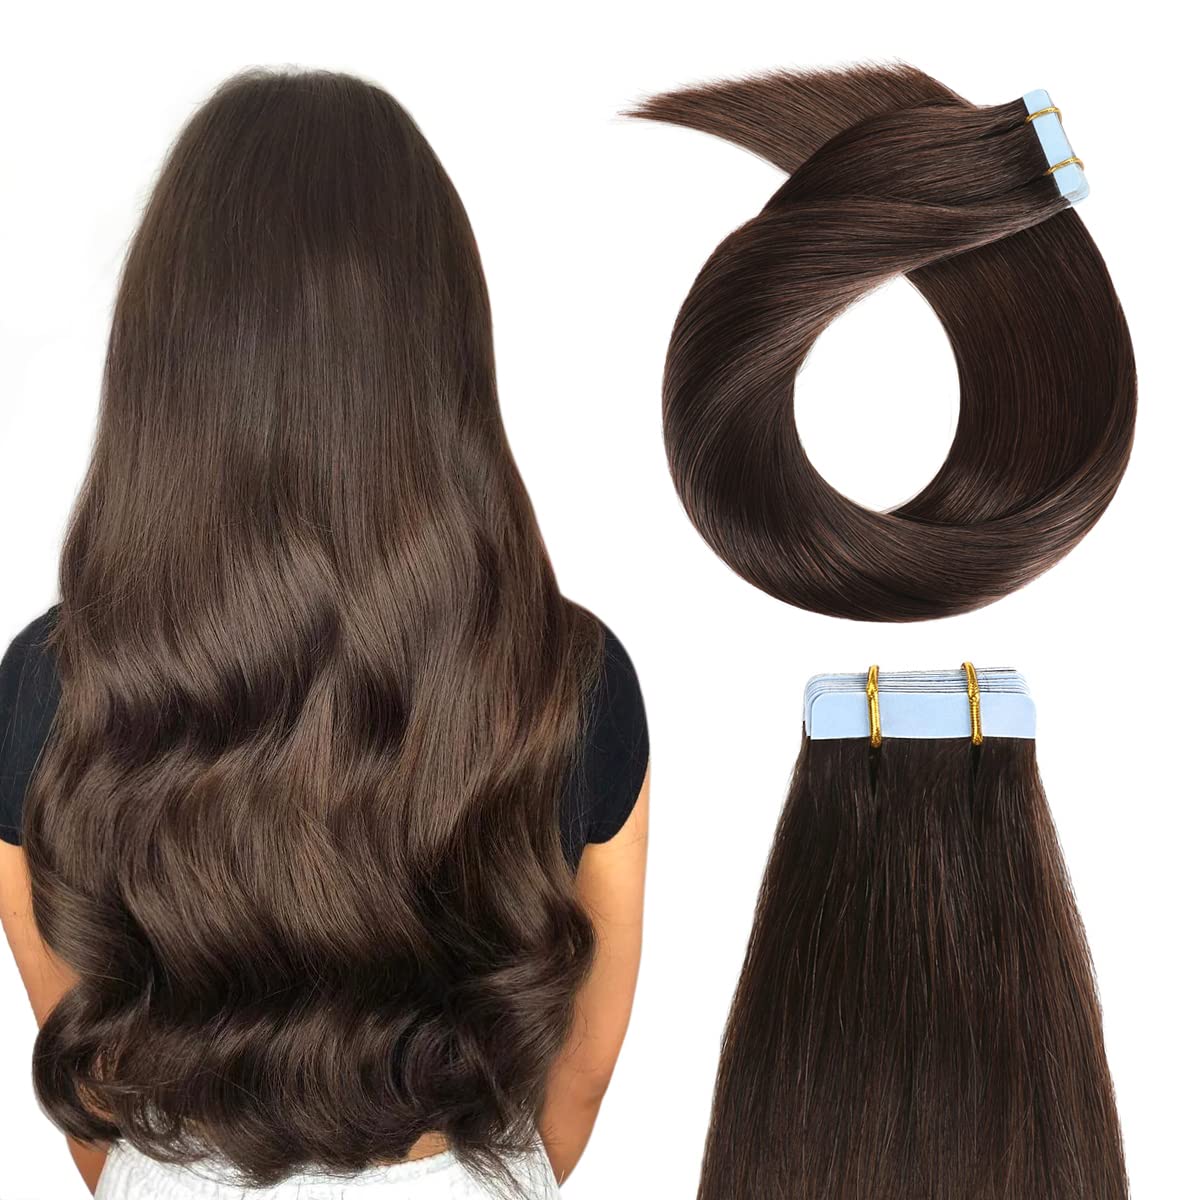 YILITE Tape in Hair Extensions Human Hair 14inch-20 inch 50g 20pcs Silky Straight Remy Hair Extensions Tape in #2 Darkest Brown Color 